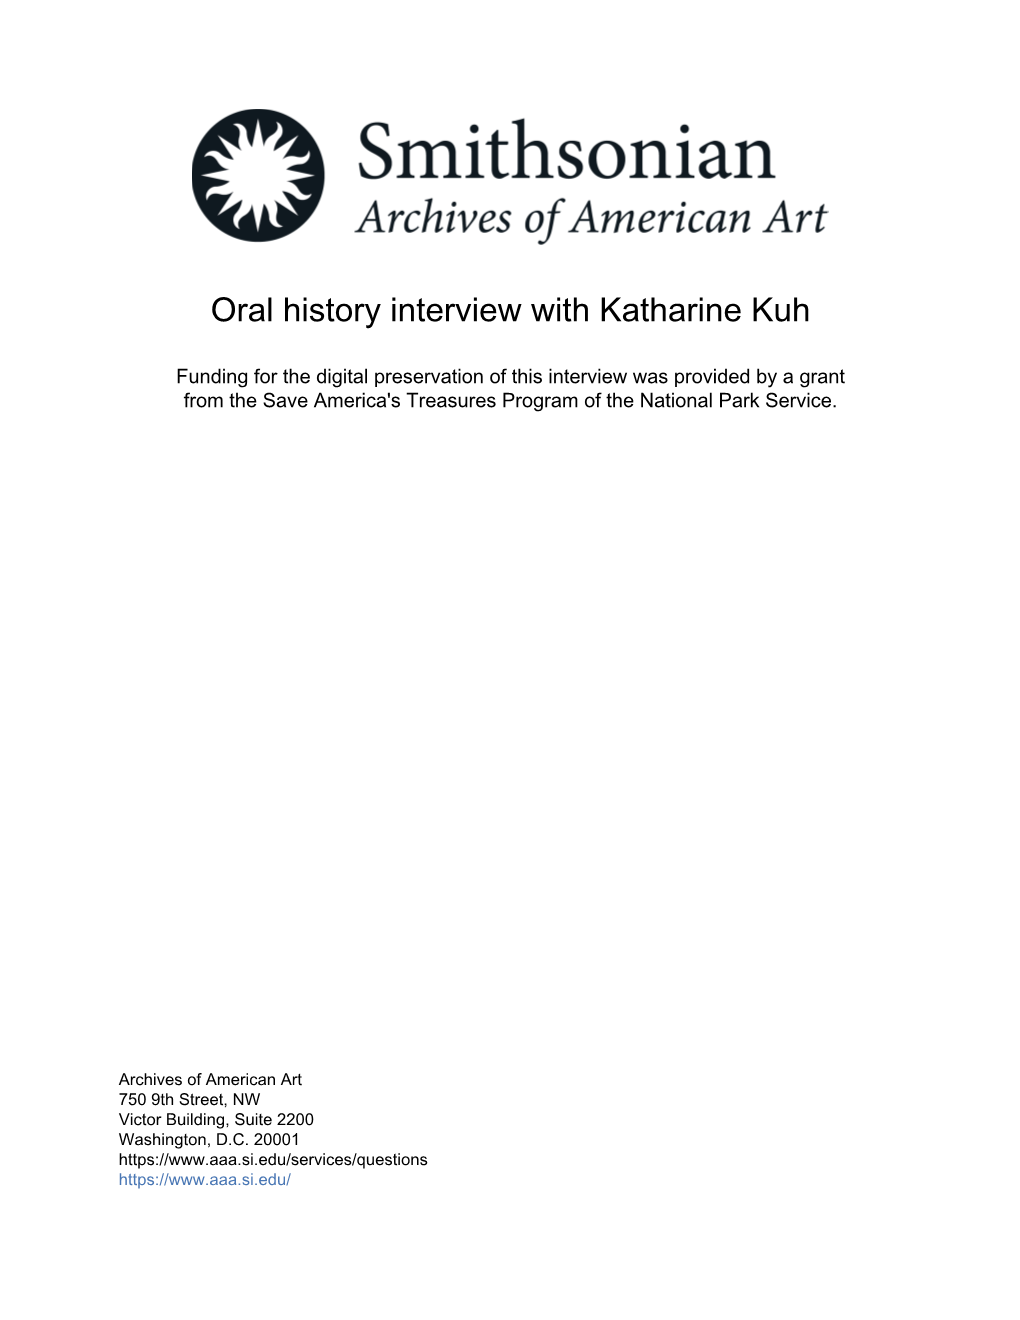 Oral History Interview with Katharine Kuh